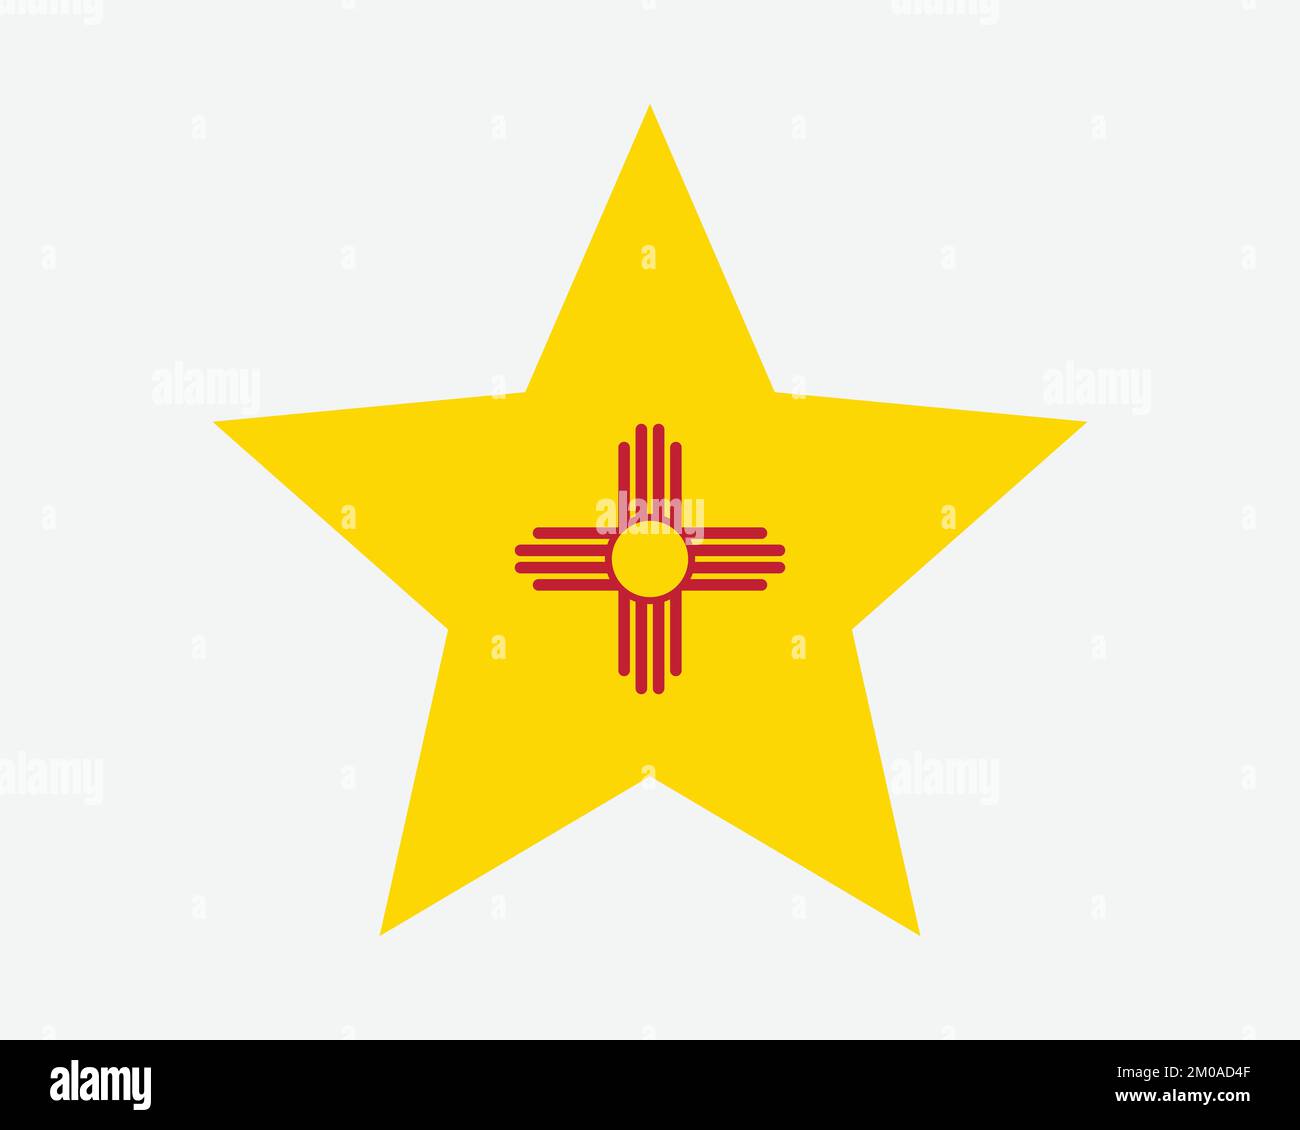 New Mexico Star Flag. NM USA Five Point Star Shape State Flag. New Mexican US Banner Icon Symbol Vector Flat Artwork Graphic Illustration Stock Vector